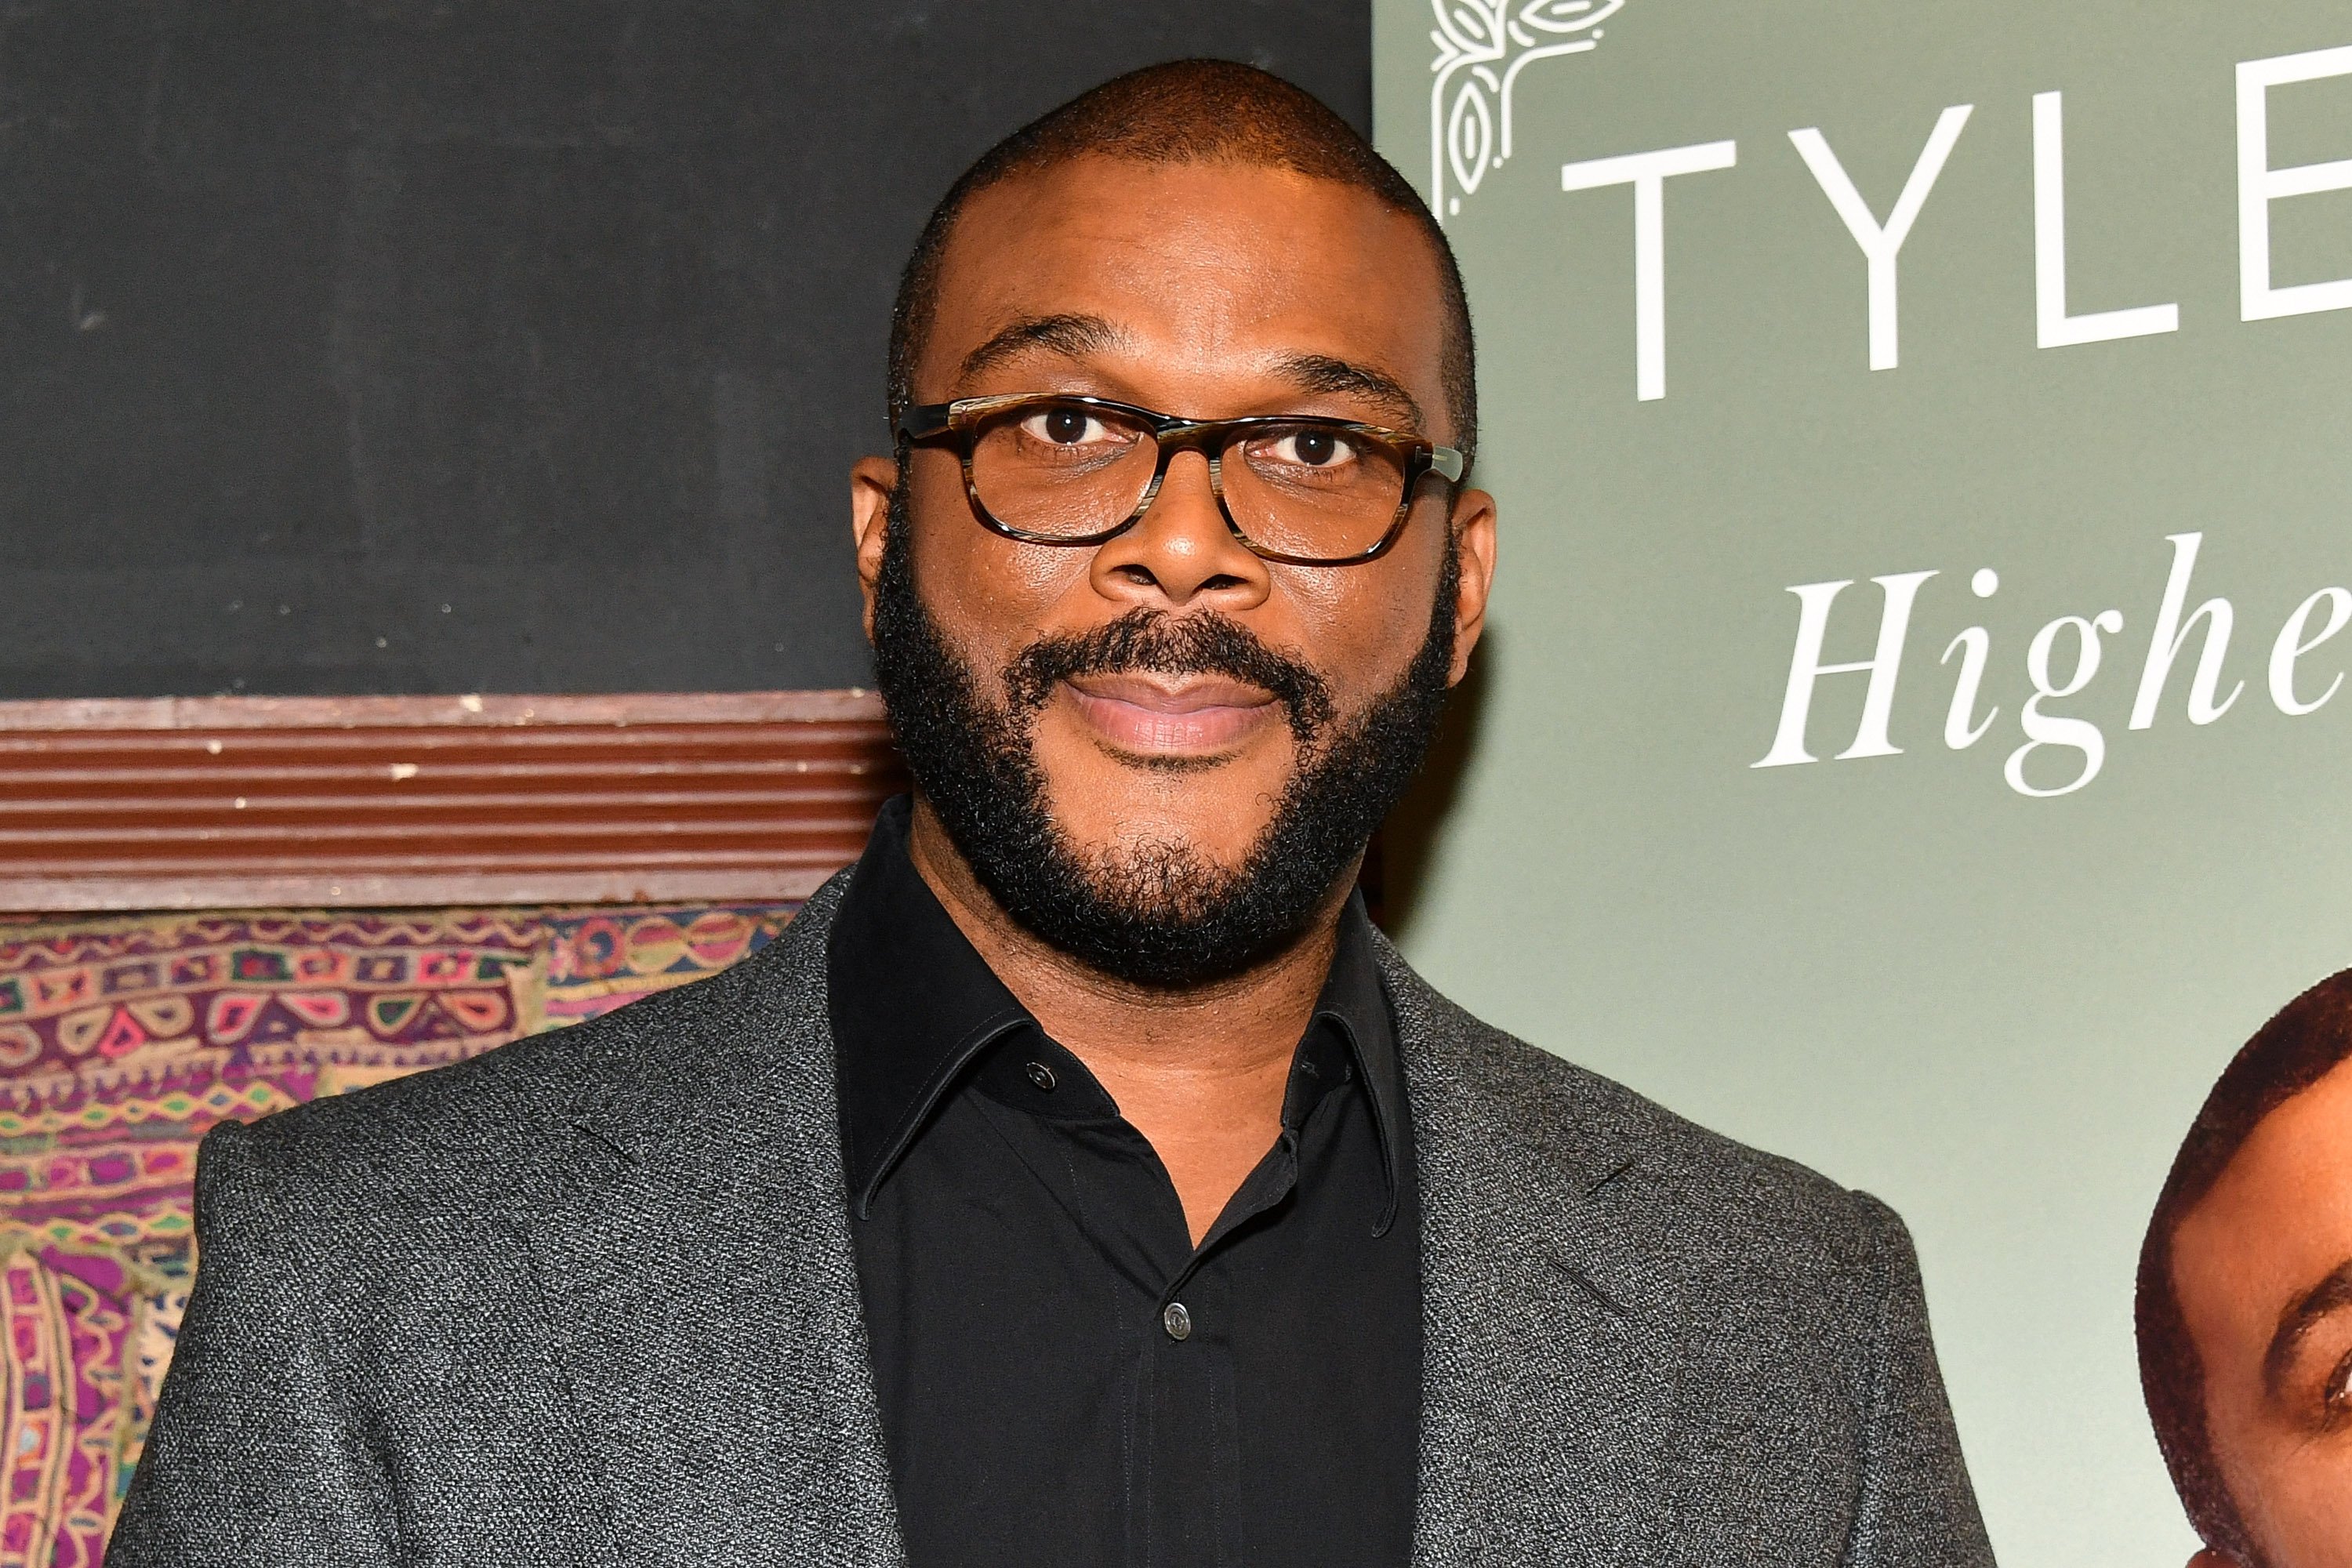 Tyler Perry launches his  book "Higher Is Waiting" at the Gramercy Theatre on November 14, 2017 | Photo: GettyImages